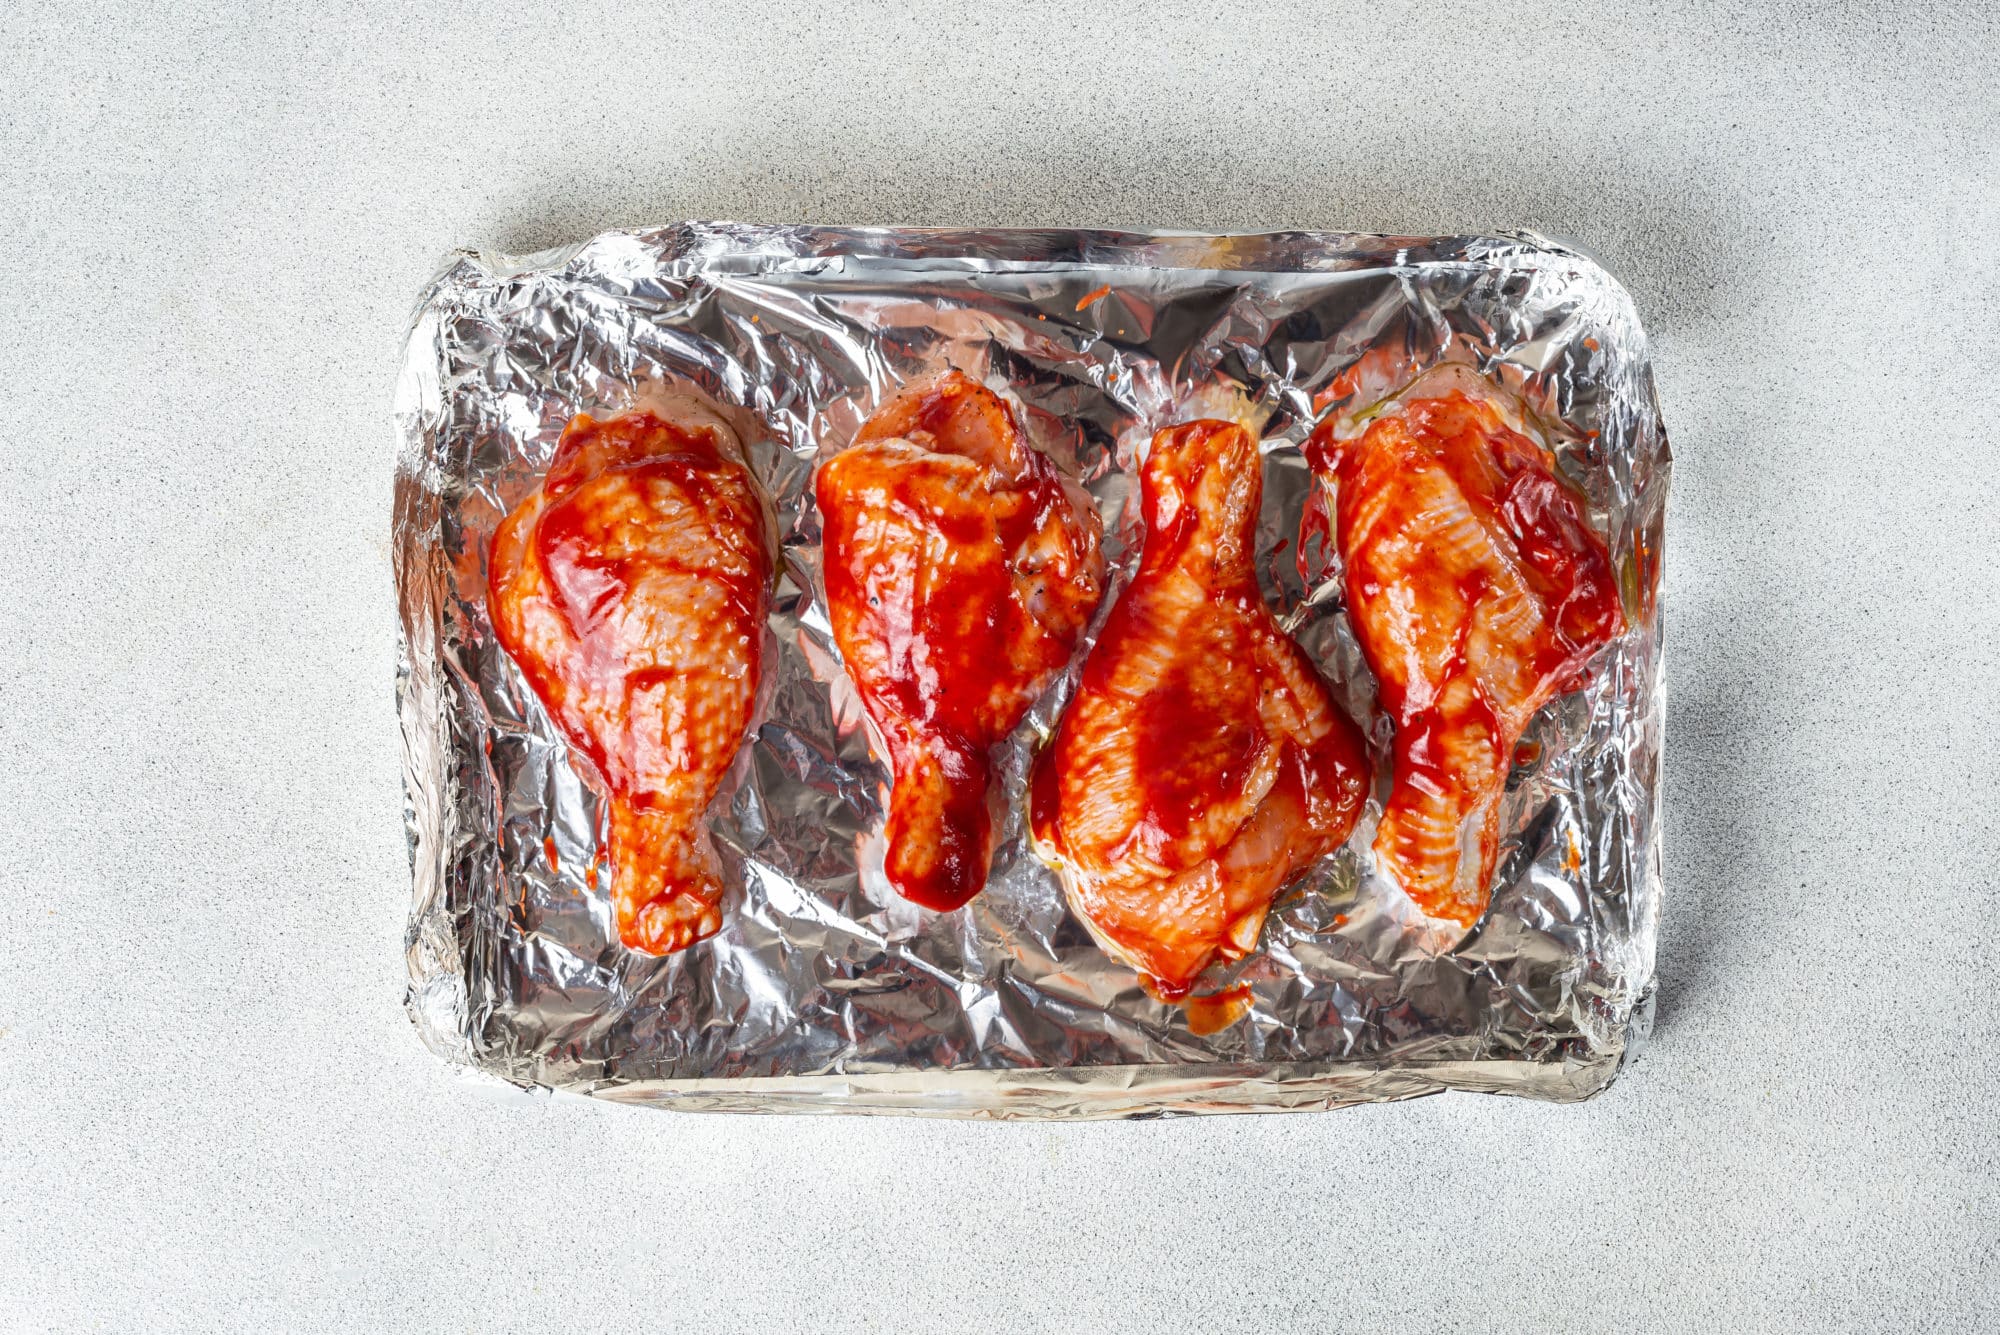 chicken-drumsticks-on-foil-brushed-with-barbecue-sauce